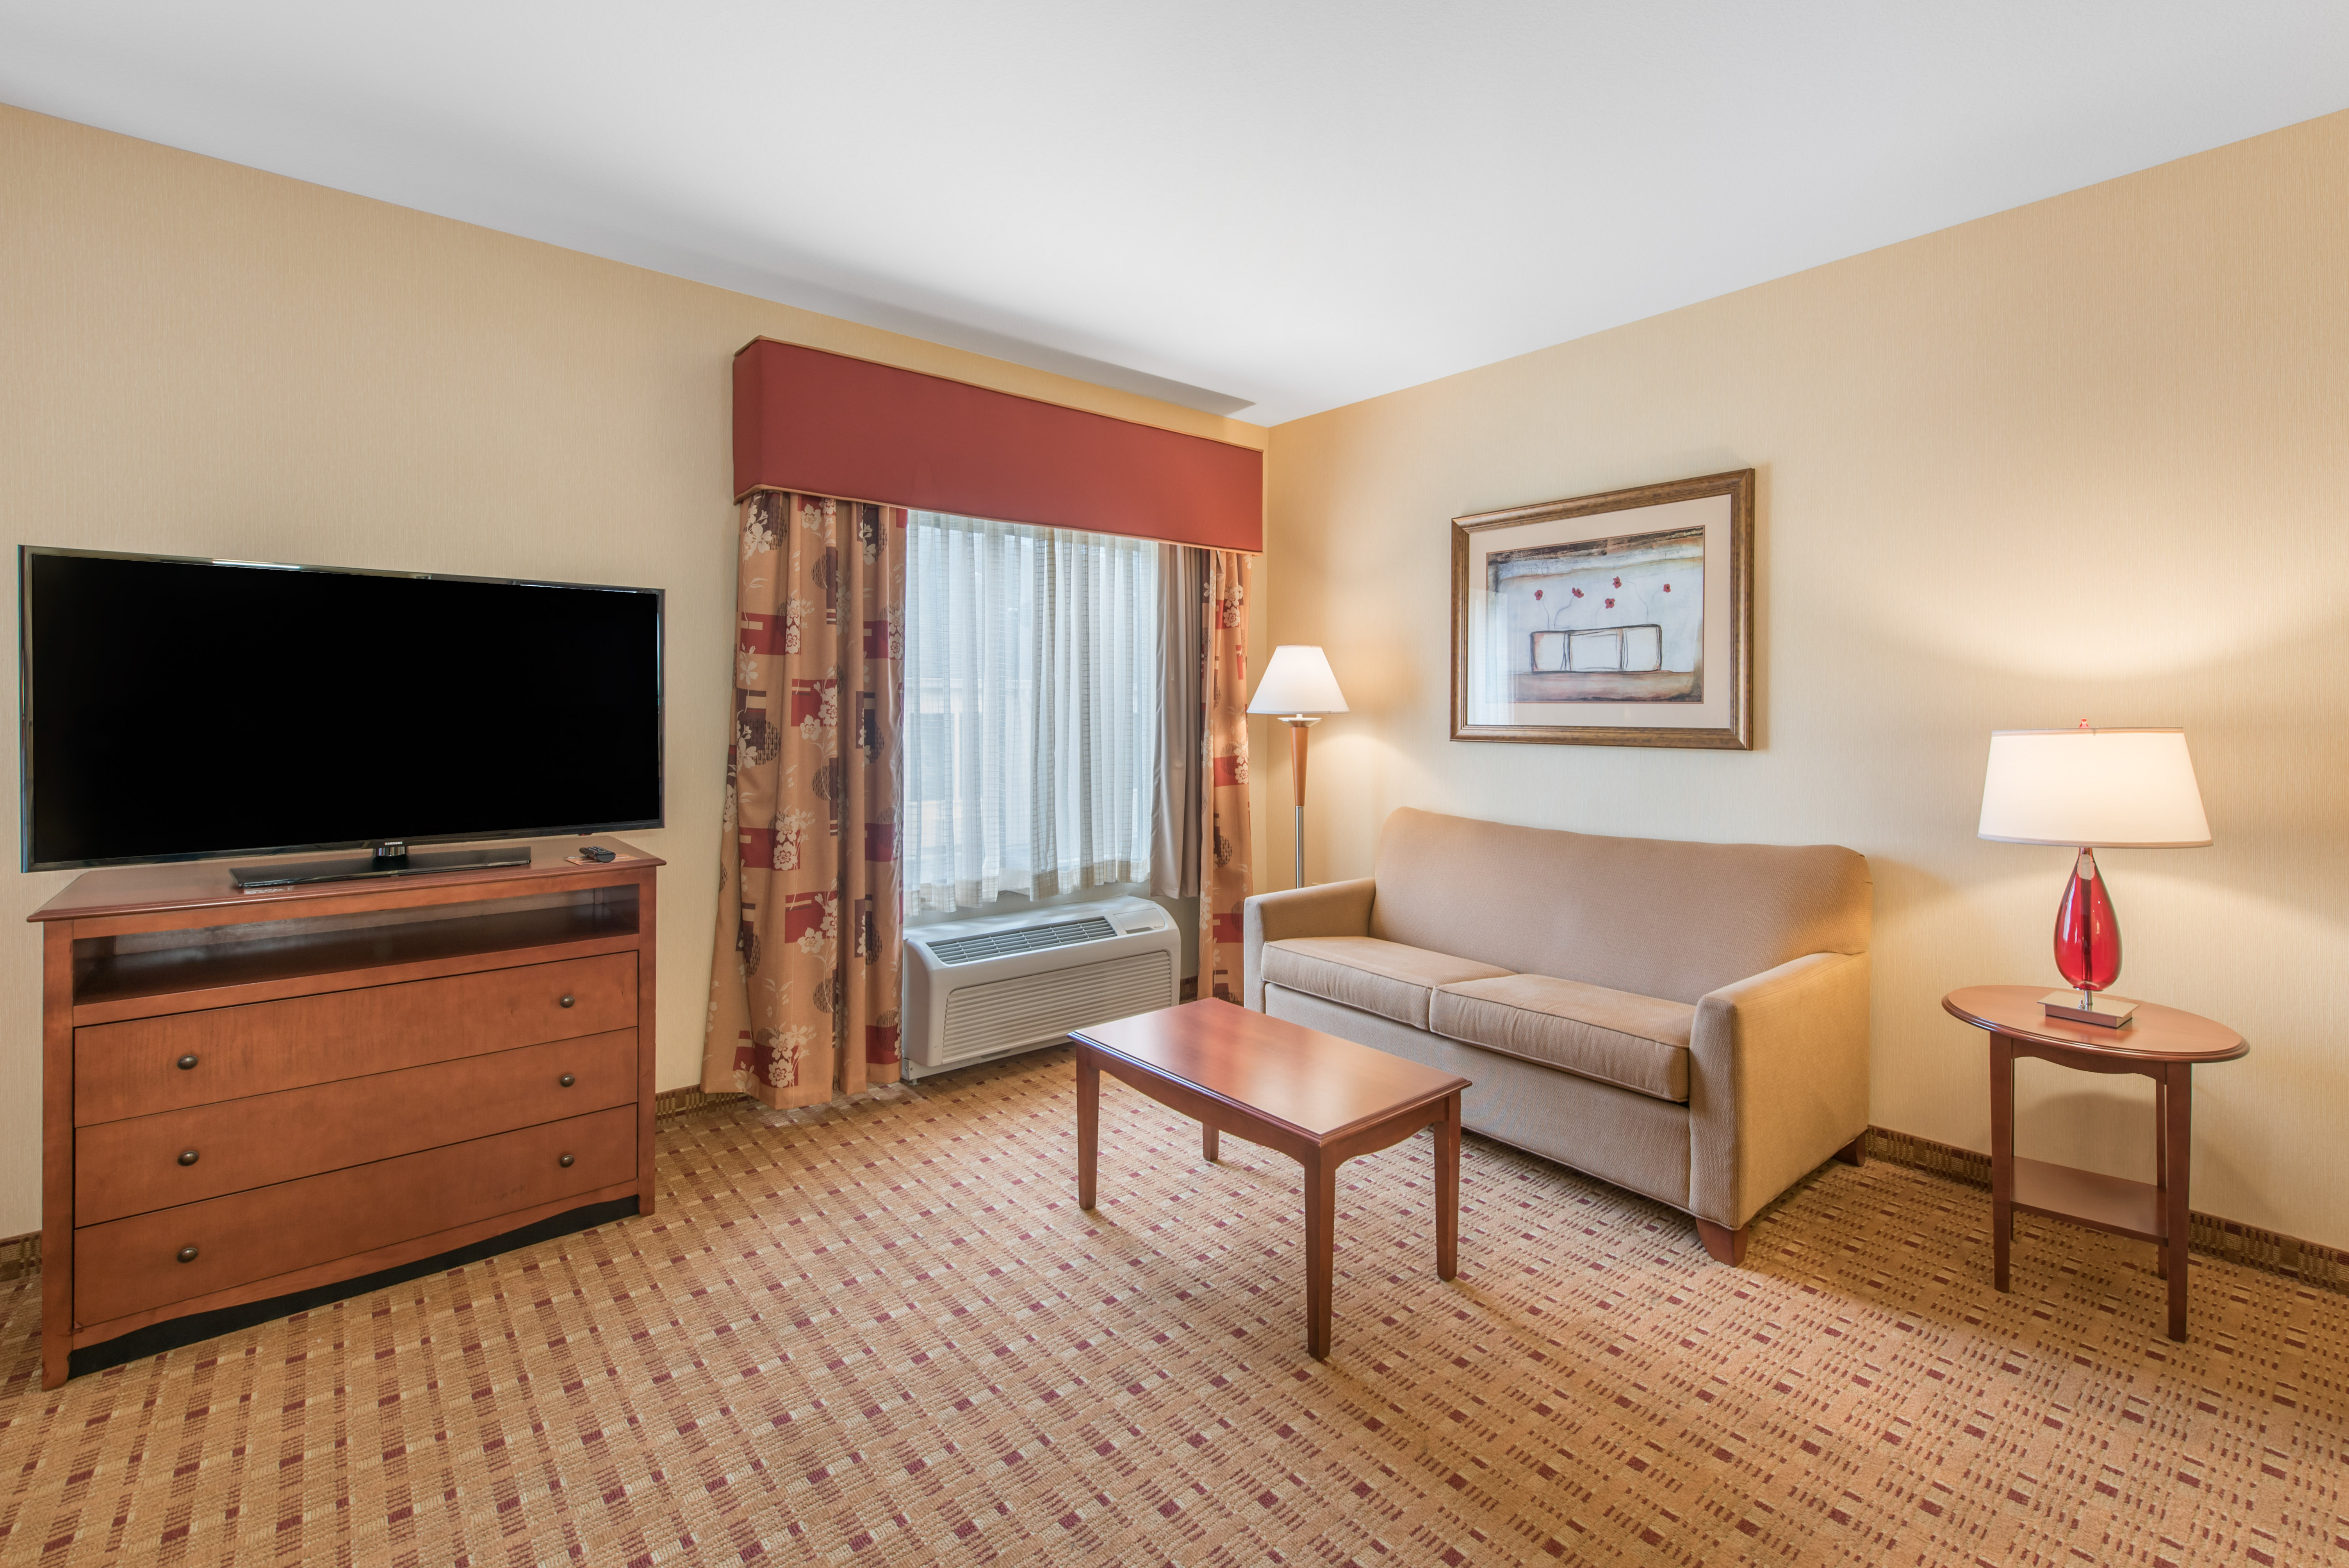 Flat Screen TV and Sofabed in 2 Queen Suite